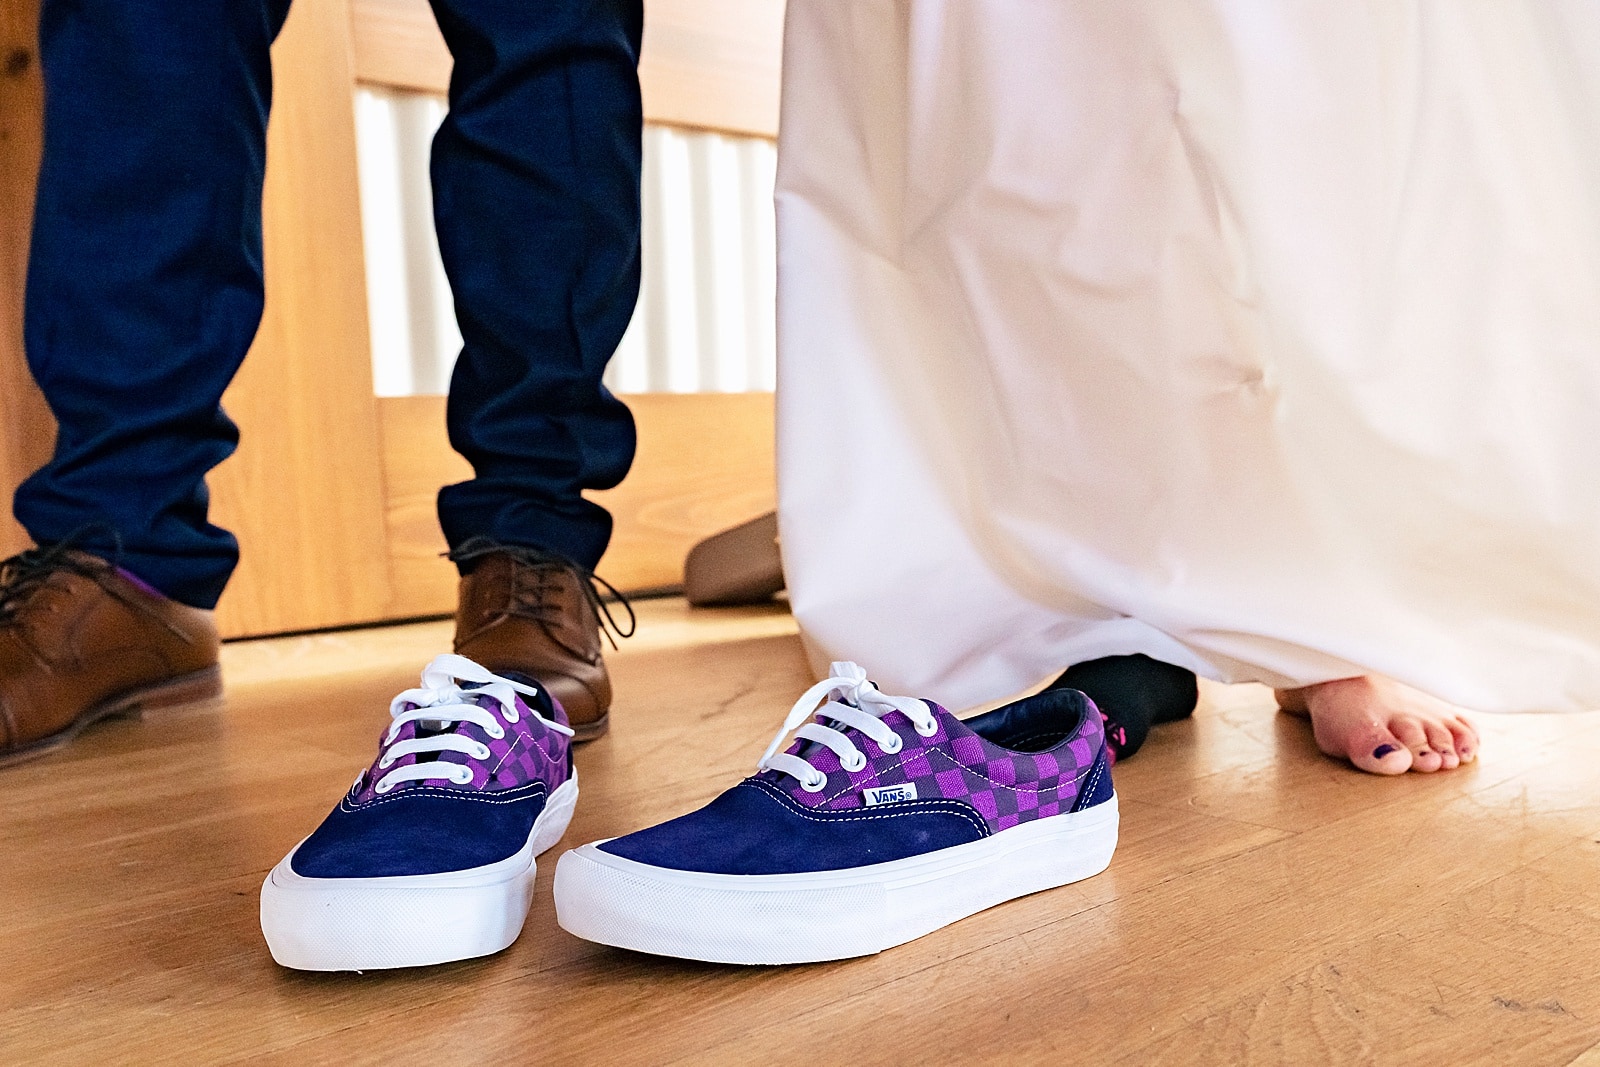 You should definitely consider changing into some flats for your wedding reception. And if those flats are purple vans? Hell yeah. 